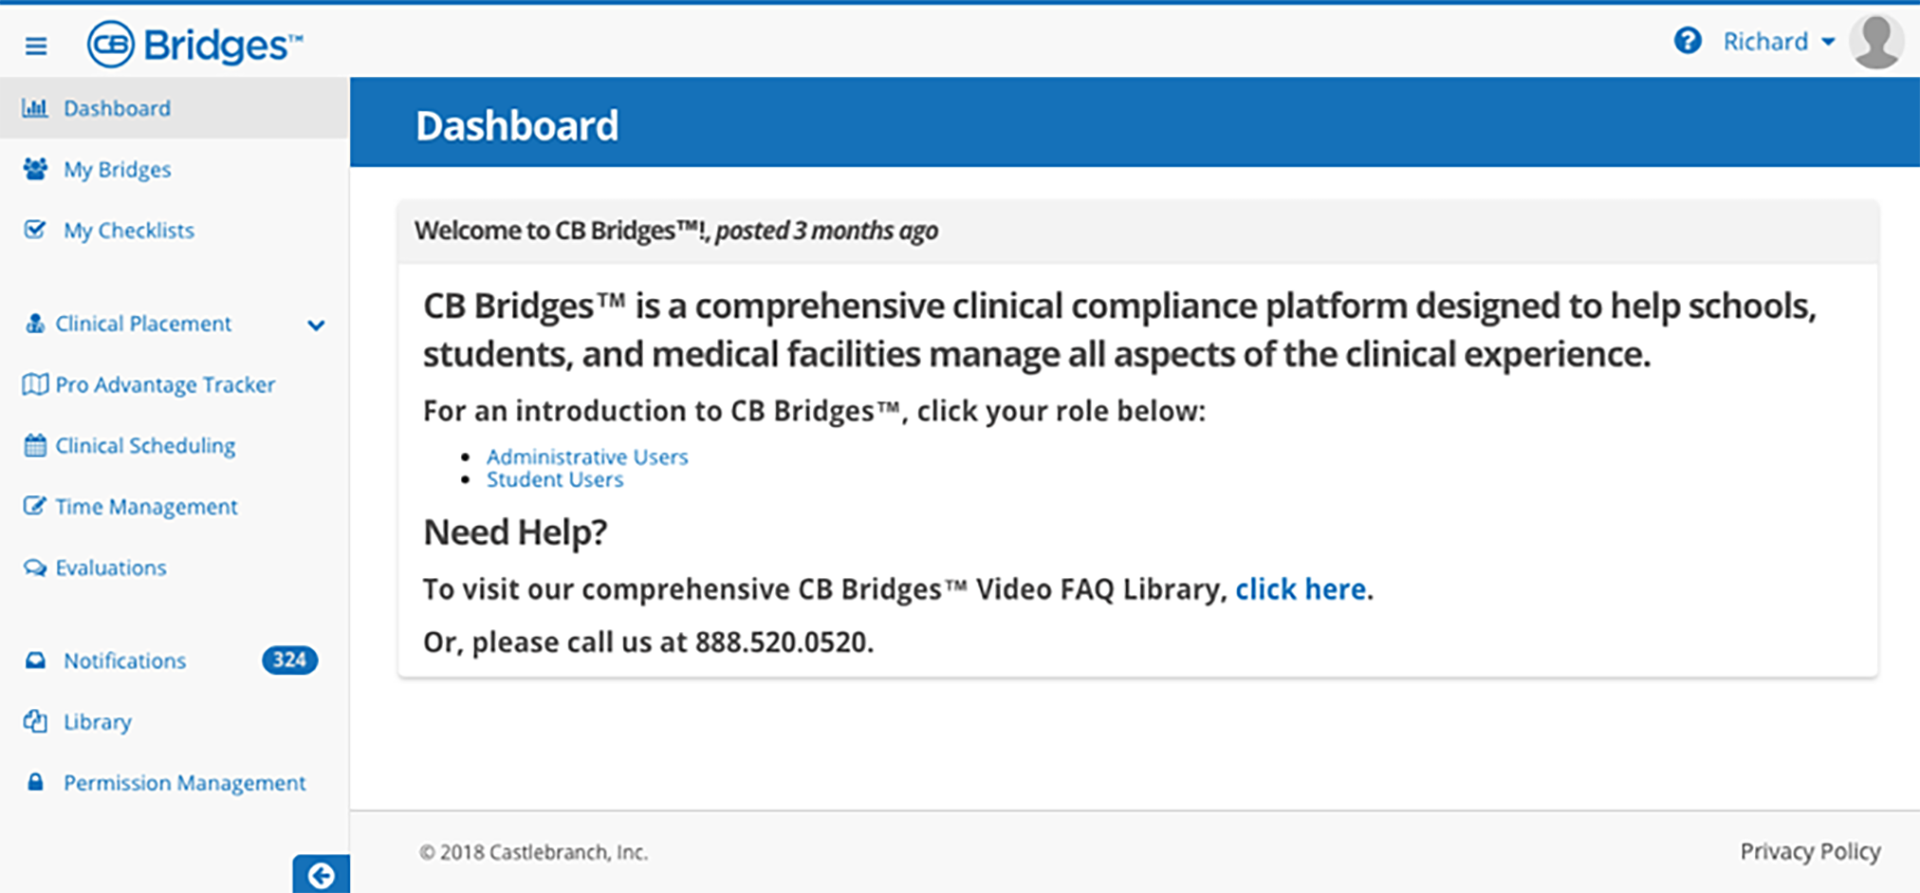 CB Bridges™ Clinical Placement myCB and AP to CB Bridges™ Single Sign On—Step 2: This is the dashboard view an Administrative User will see once they click the CB Bridges™ link in the previous screen and has been logged into the corresponding CB Bridges™ account.